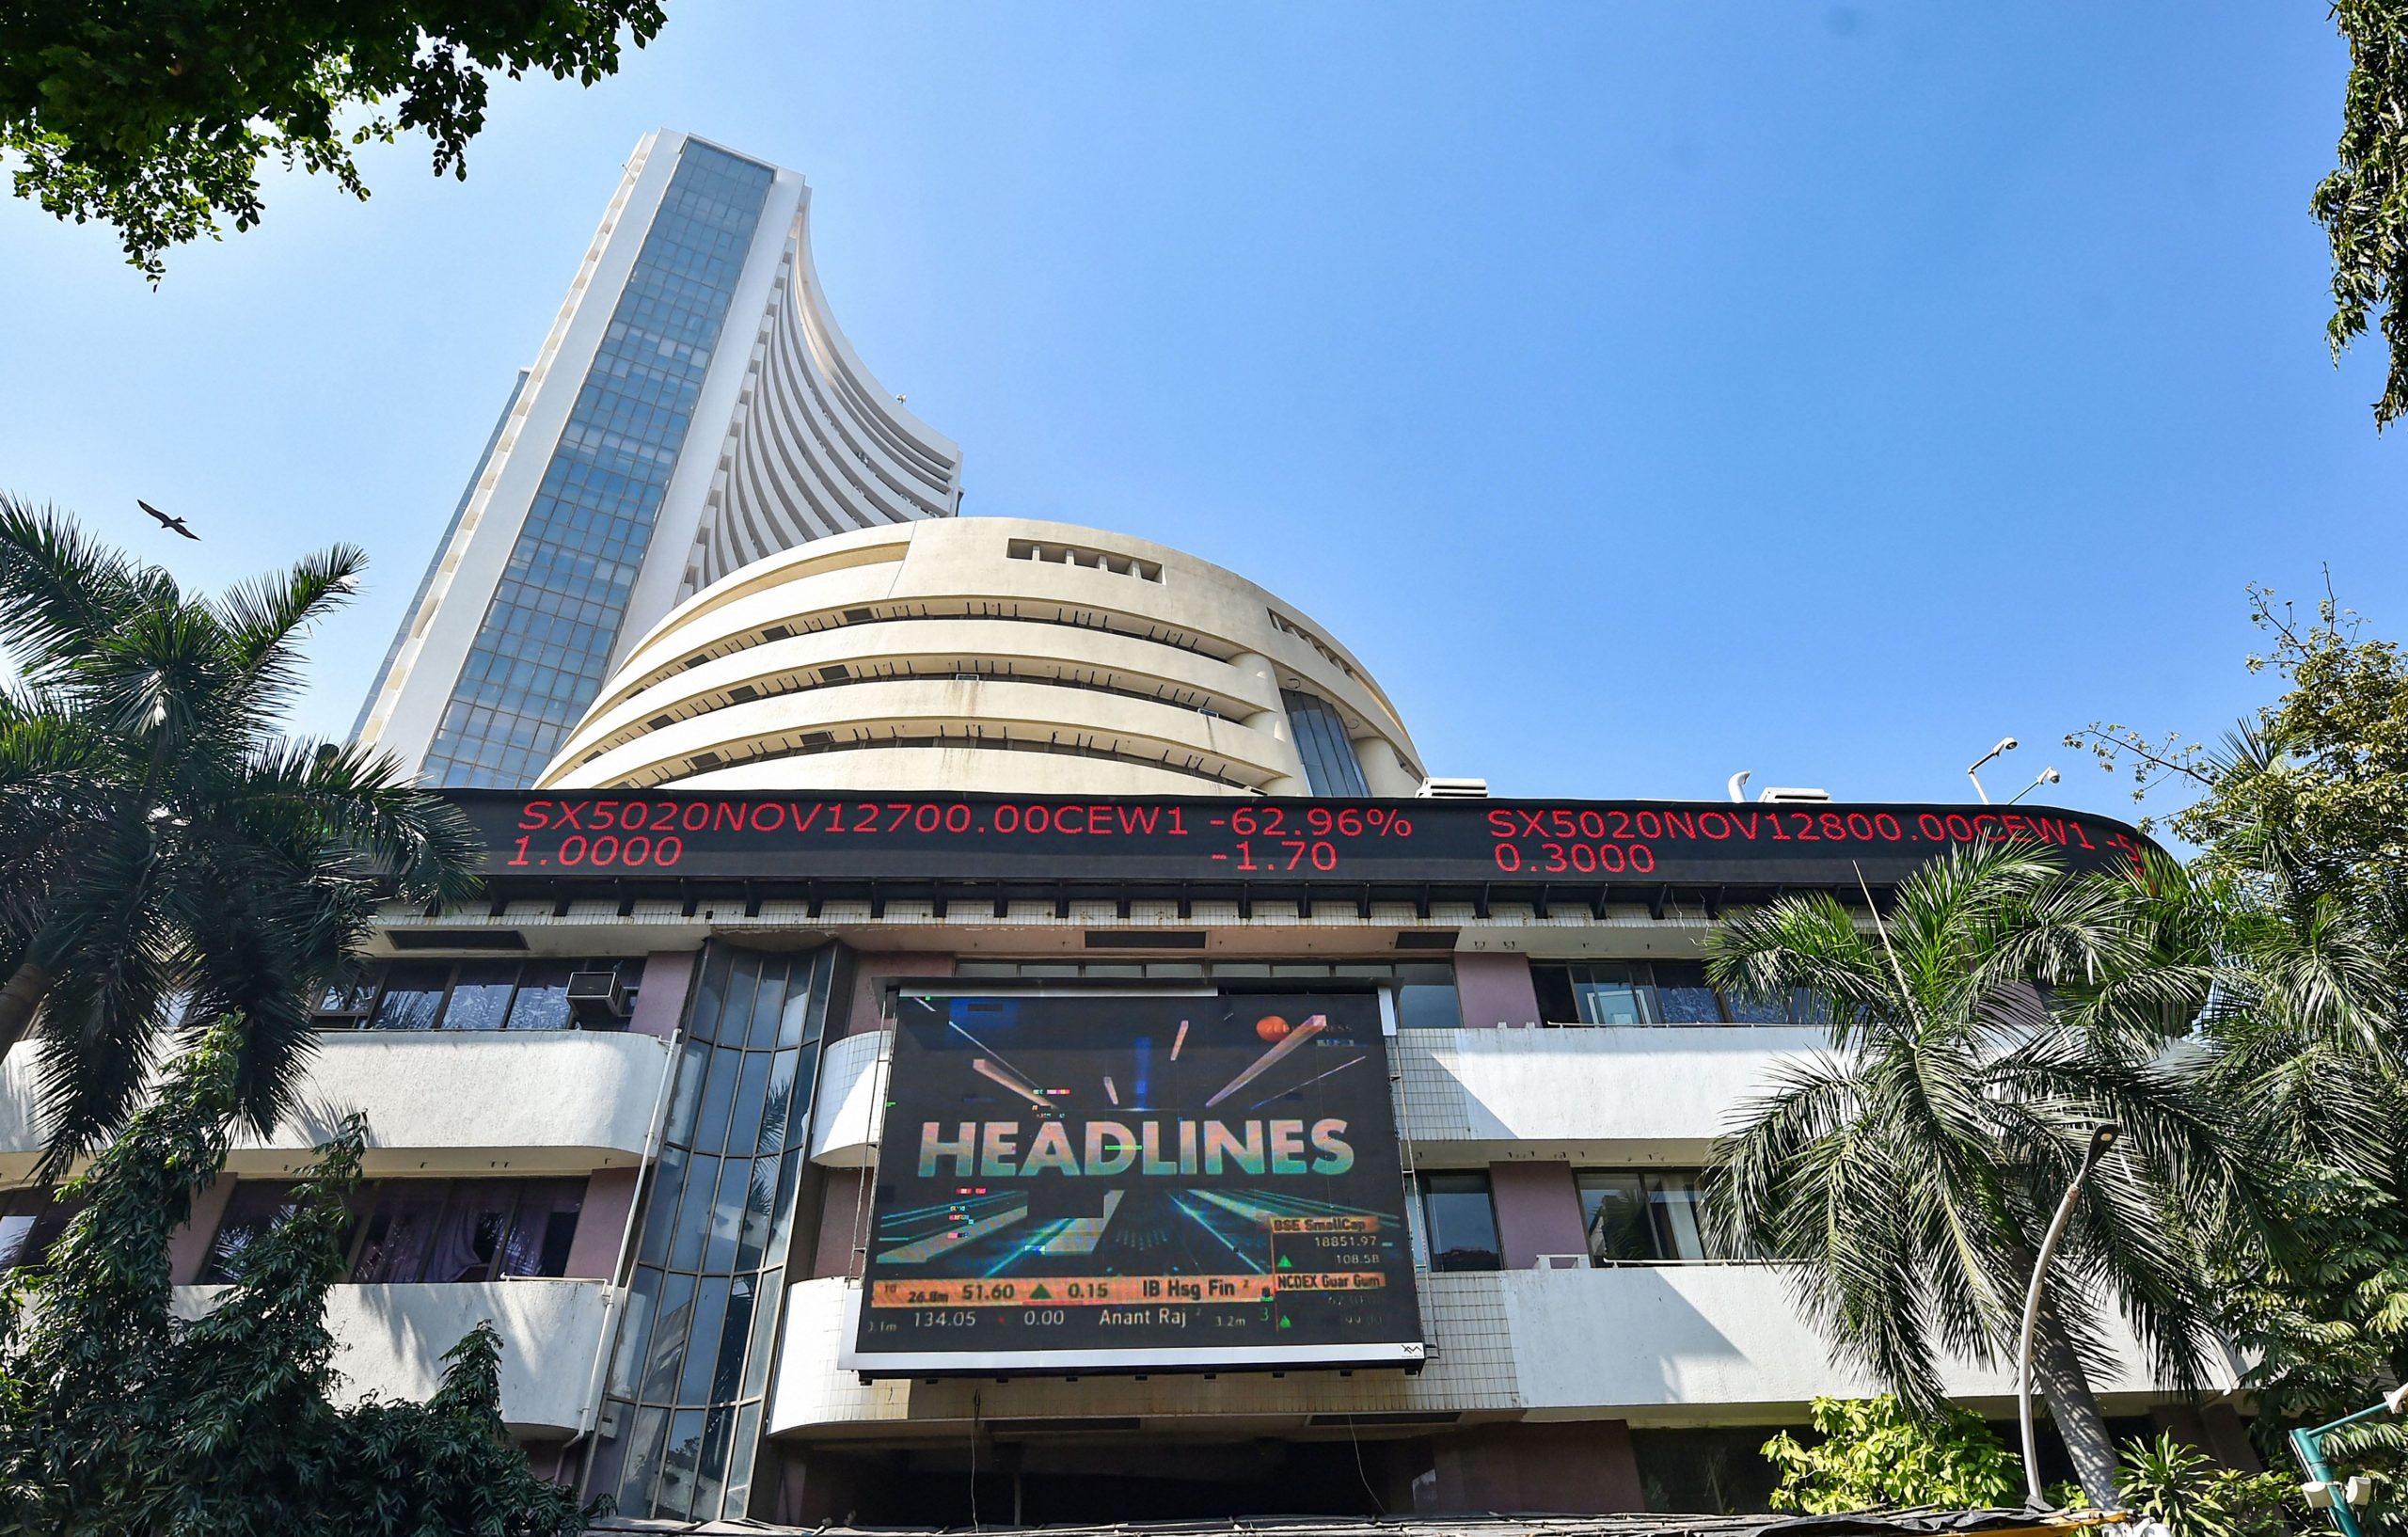 Trending Stocks: Adani Power, TCS, Biocon and others in news today